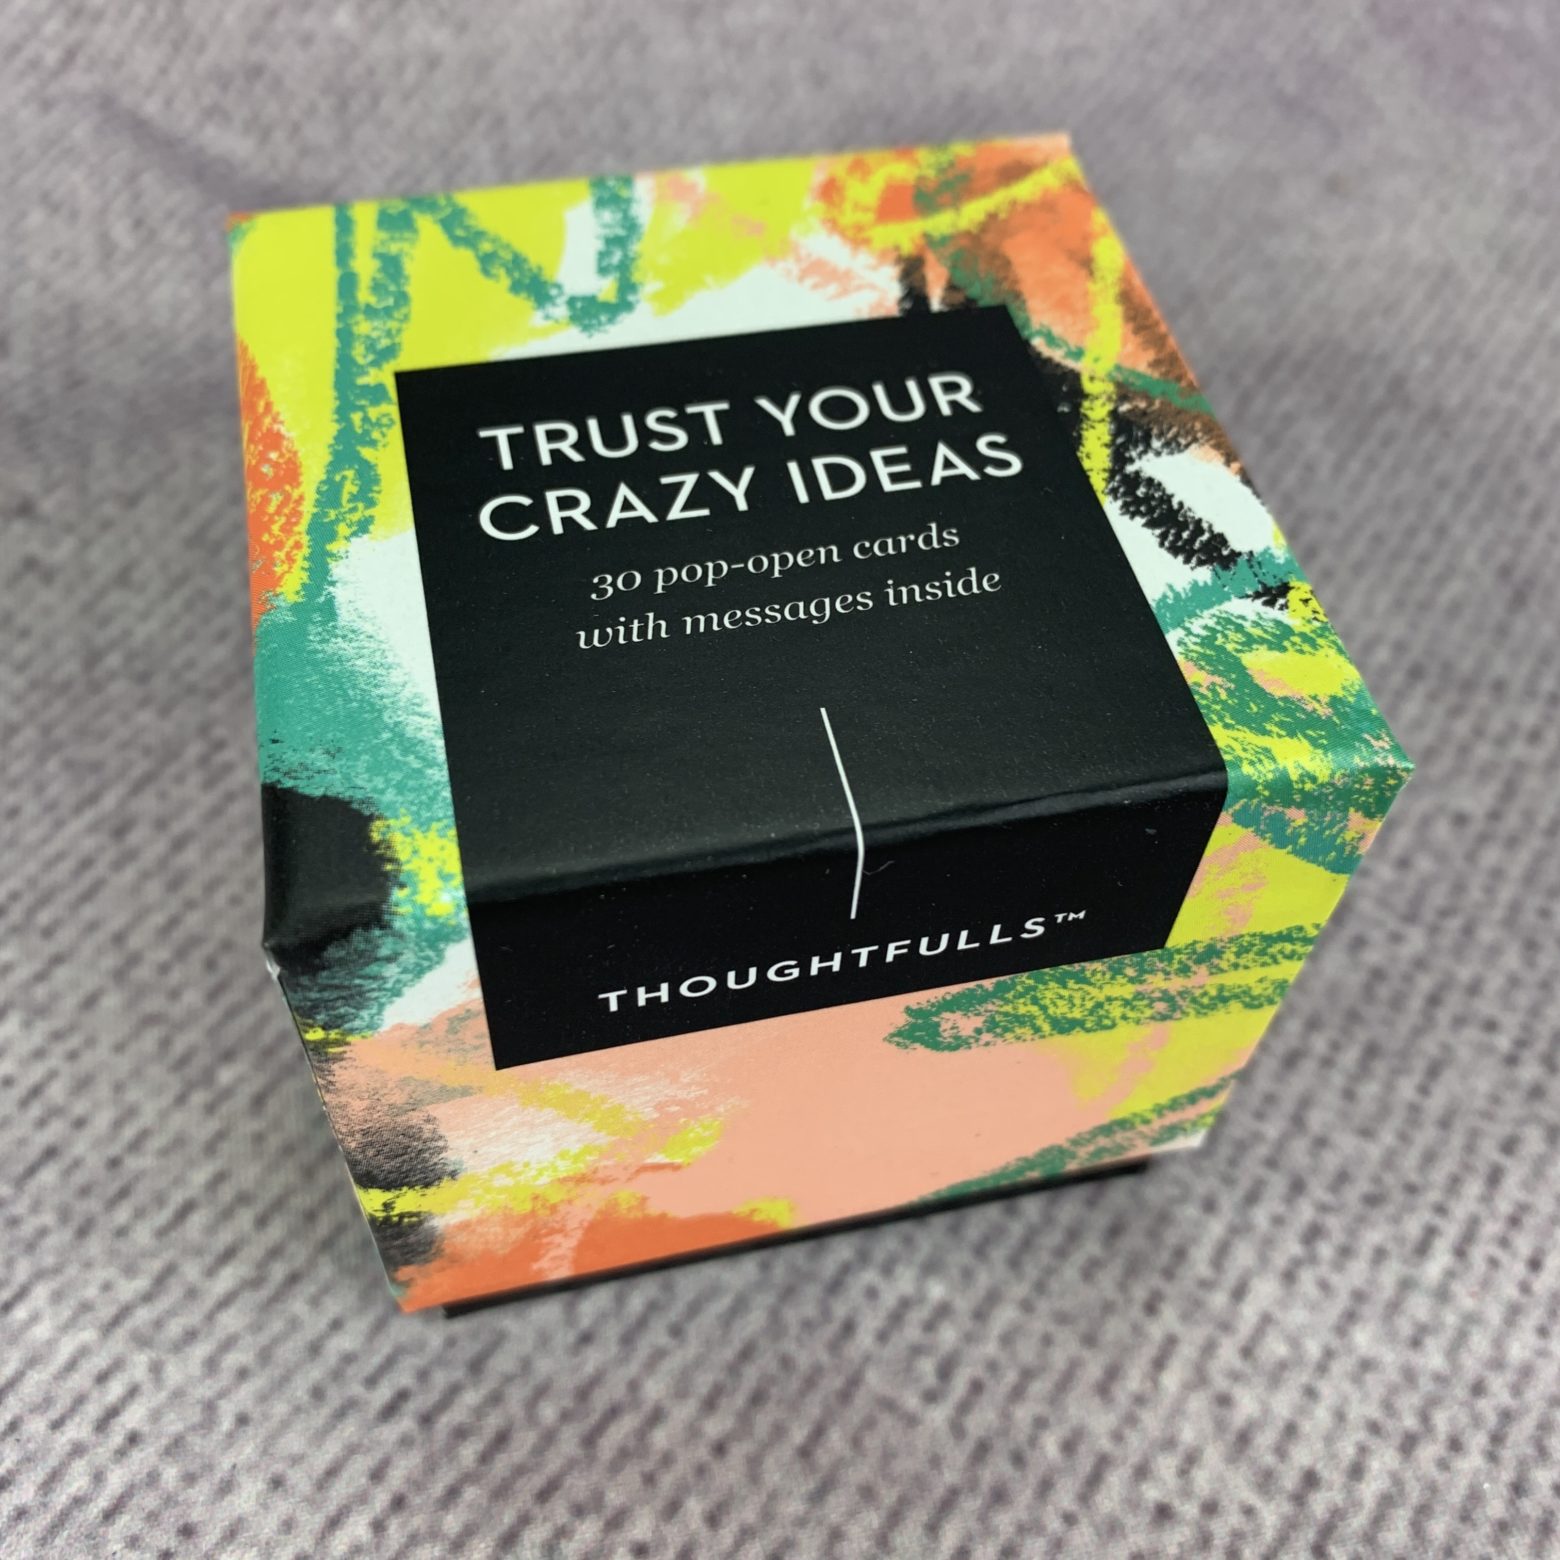 Trust Your Crazy Ideas - Thoughtfulls Box of Pop Open Cards